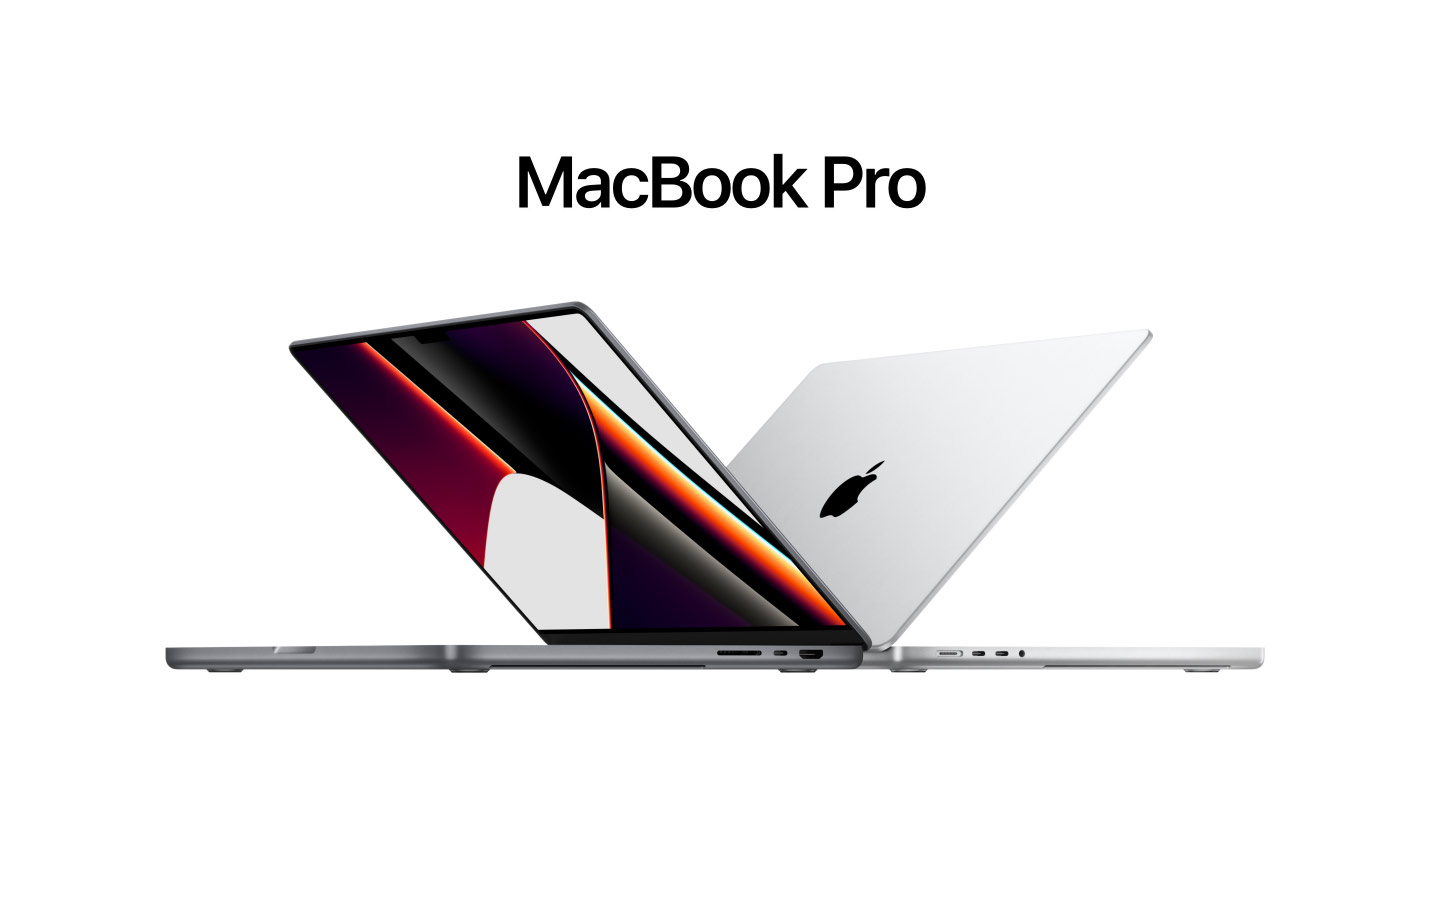 Saving up to $500: Apple is selling the 14-inch and 16-inch MacBook Pro at a deep discount on Amazon